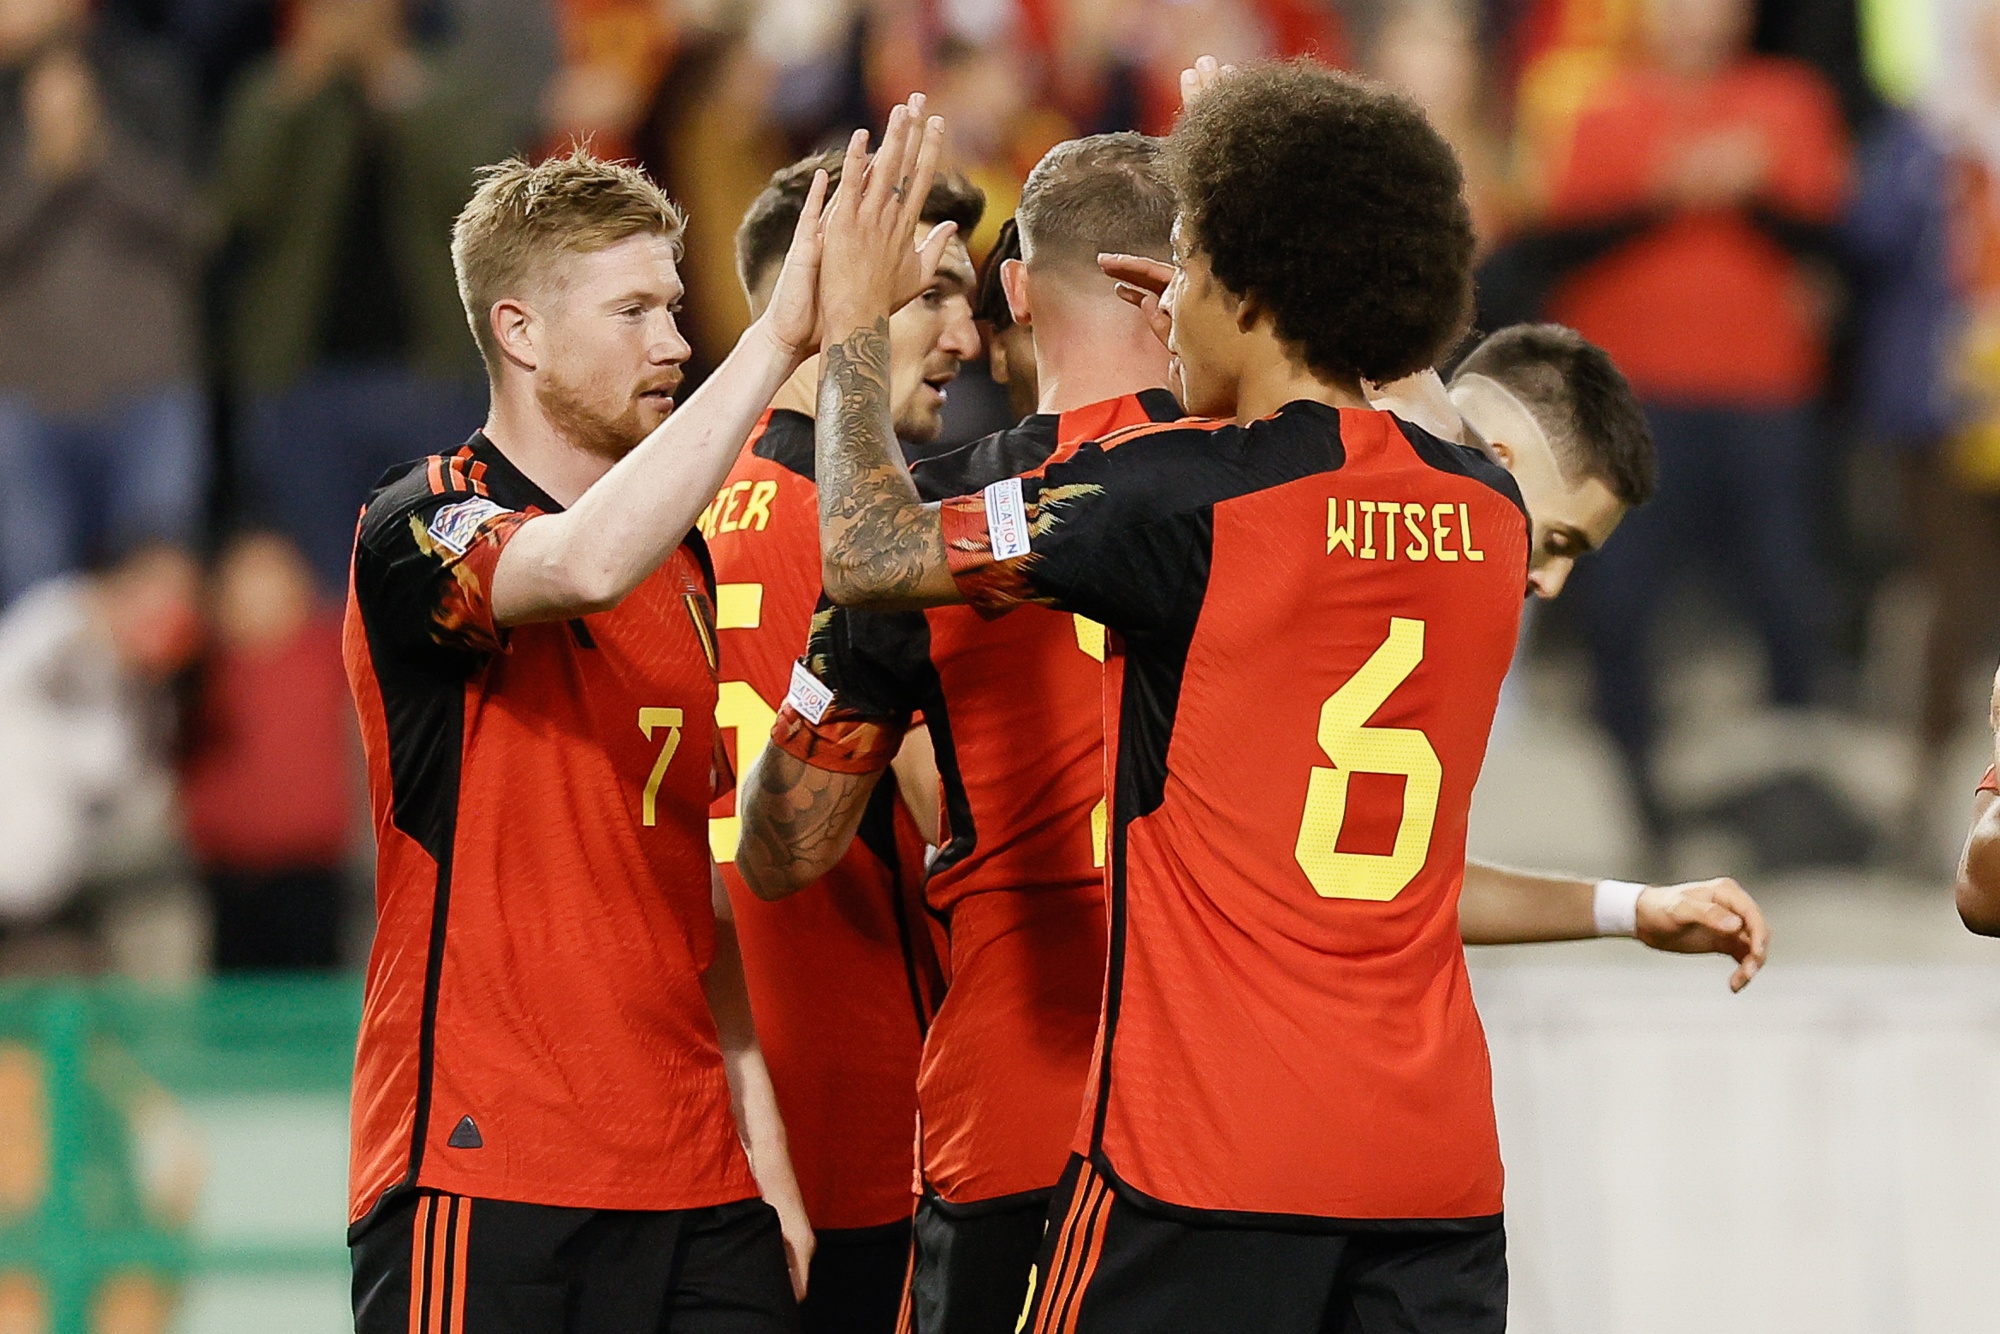 Belgium's Kevin De Bruyne celebrates after scoring during a soccer game between Belgian national team the Red Devils and Wales, Thursday 22 September 2022 in Brussels, game 5 (out of six) in the Nations League A group stage. BELGA PHOTO BRUNO FAHY